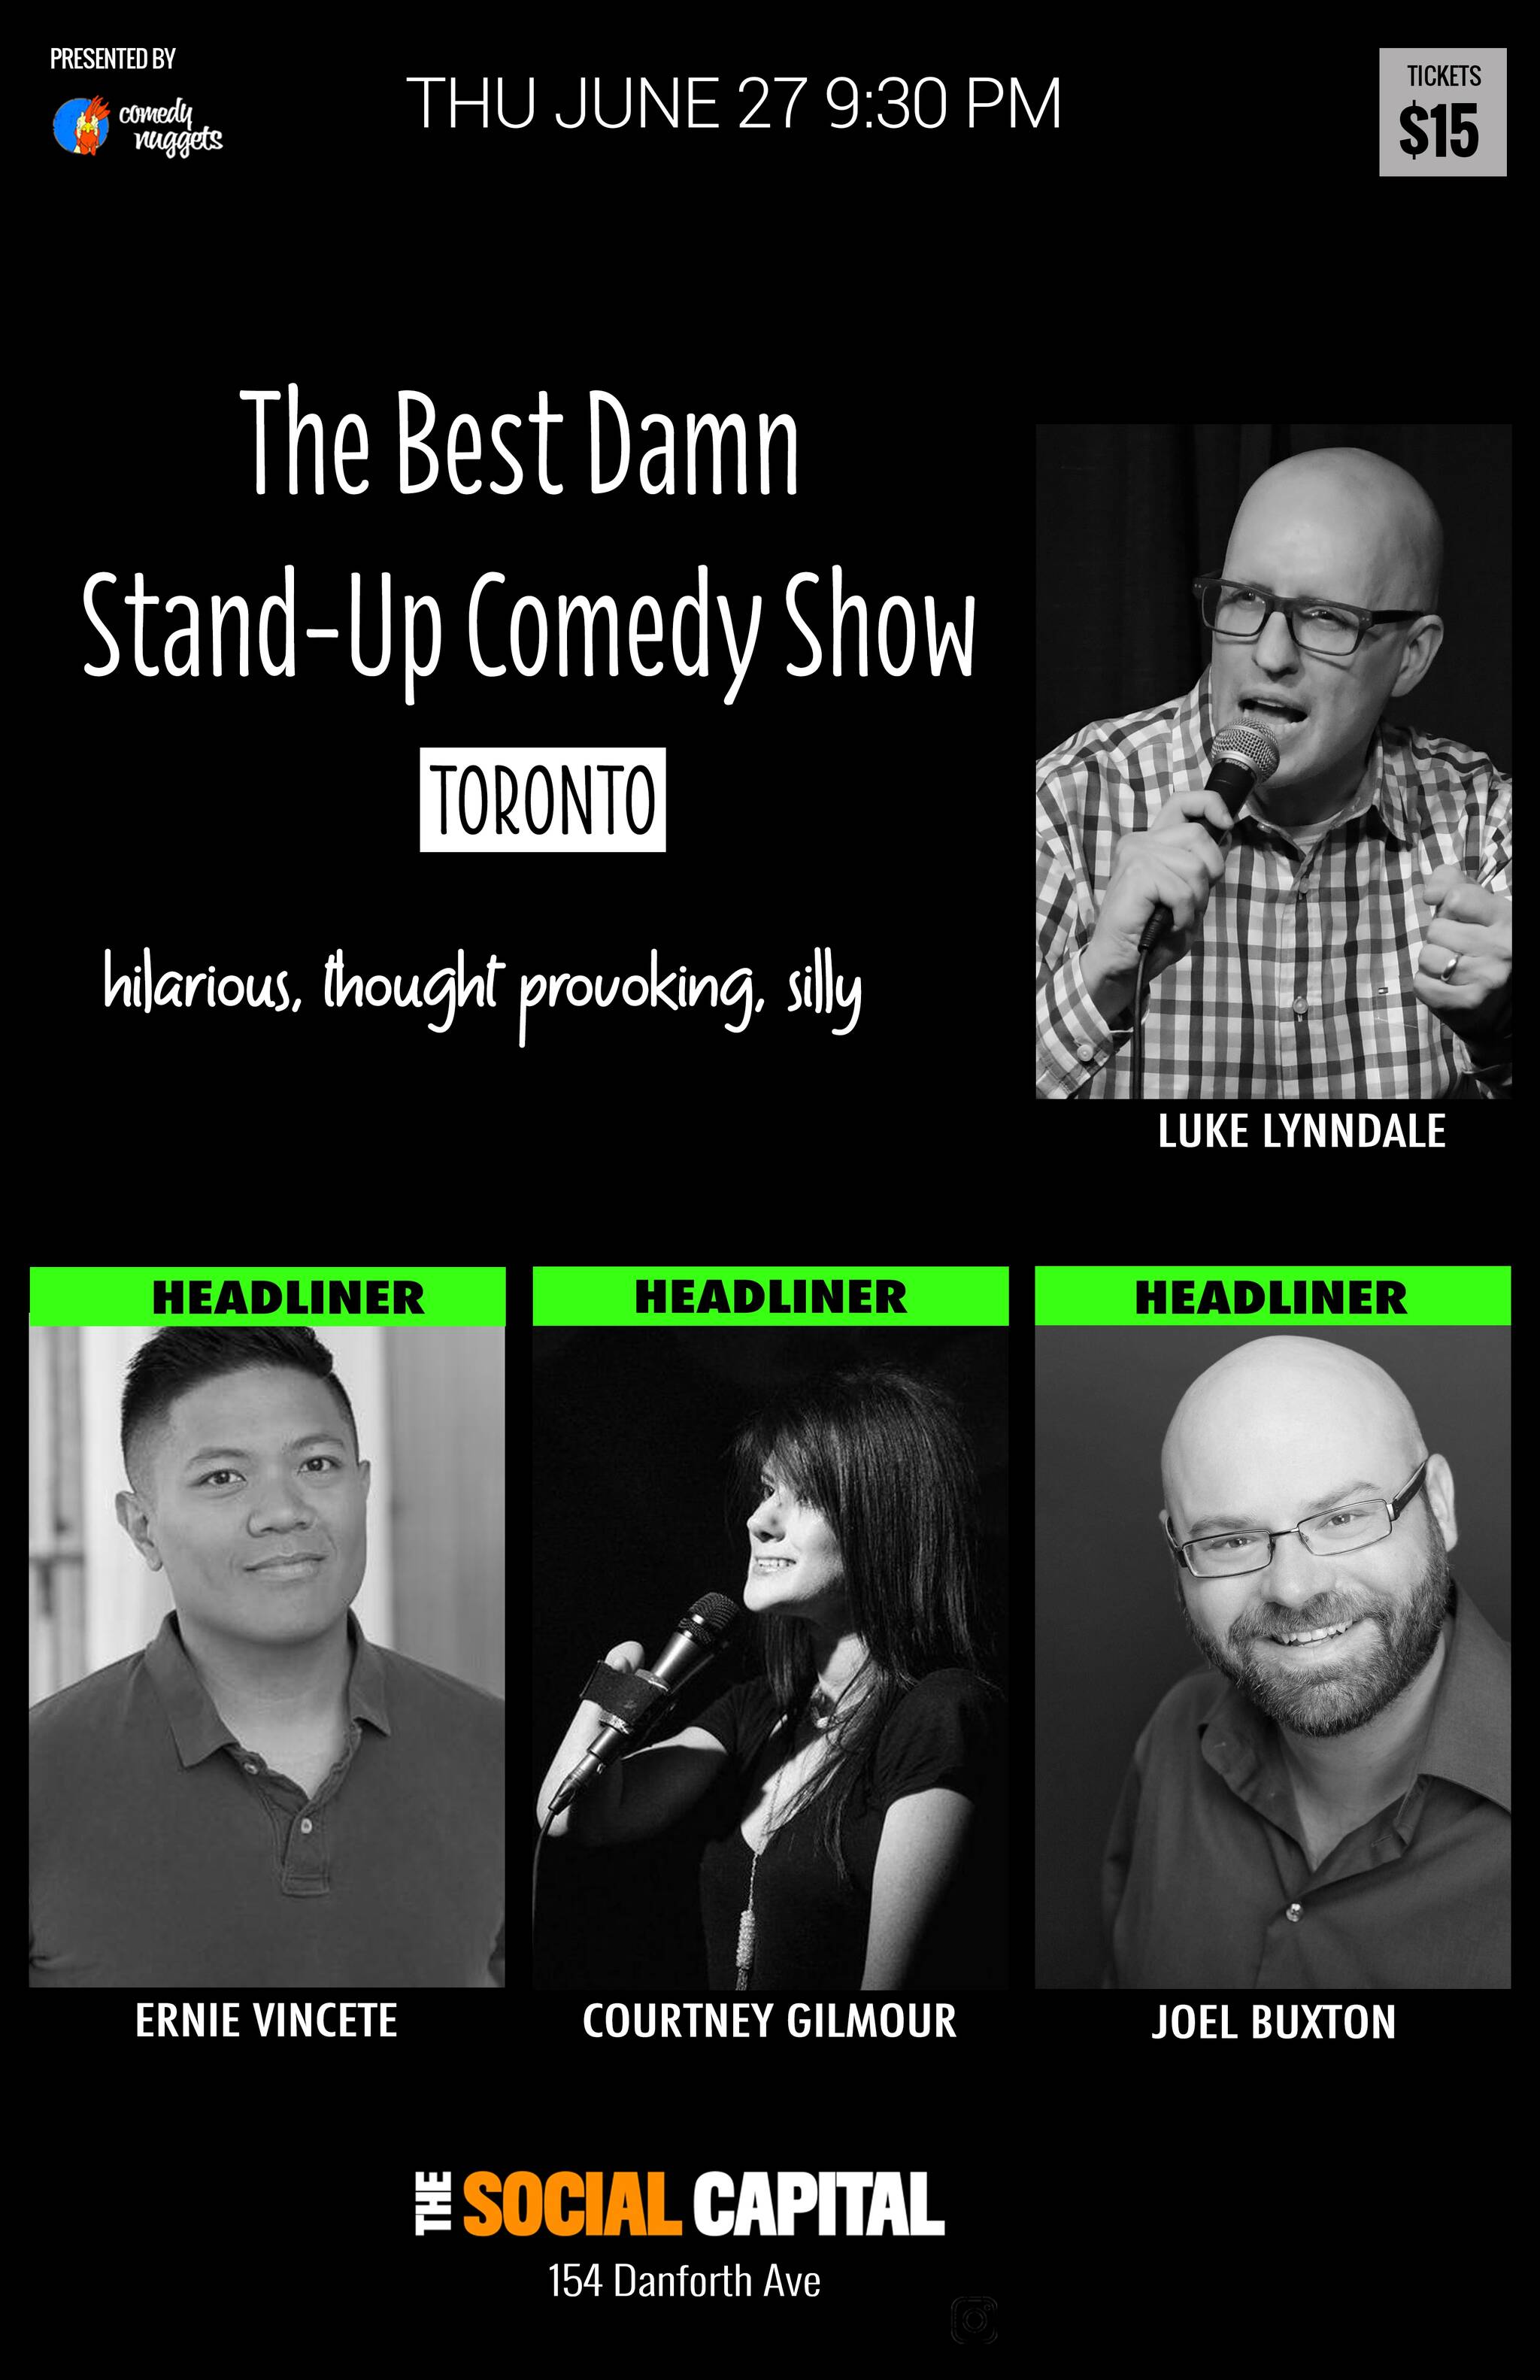 The Best Damn StandUp Comedy Show in Toronto